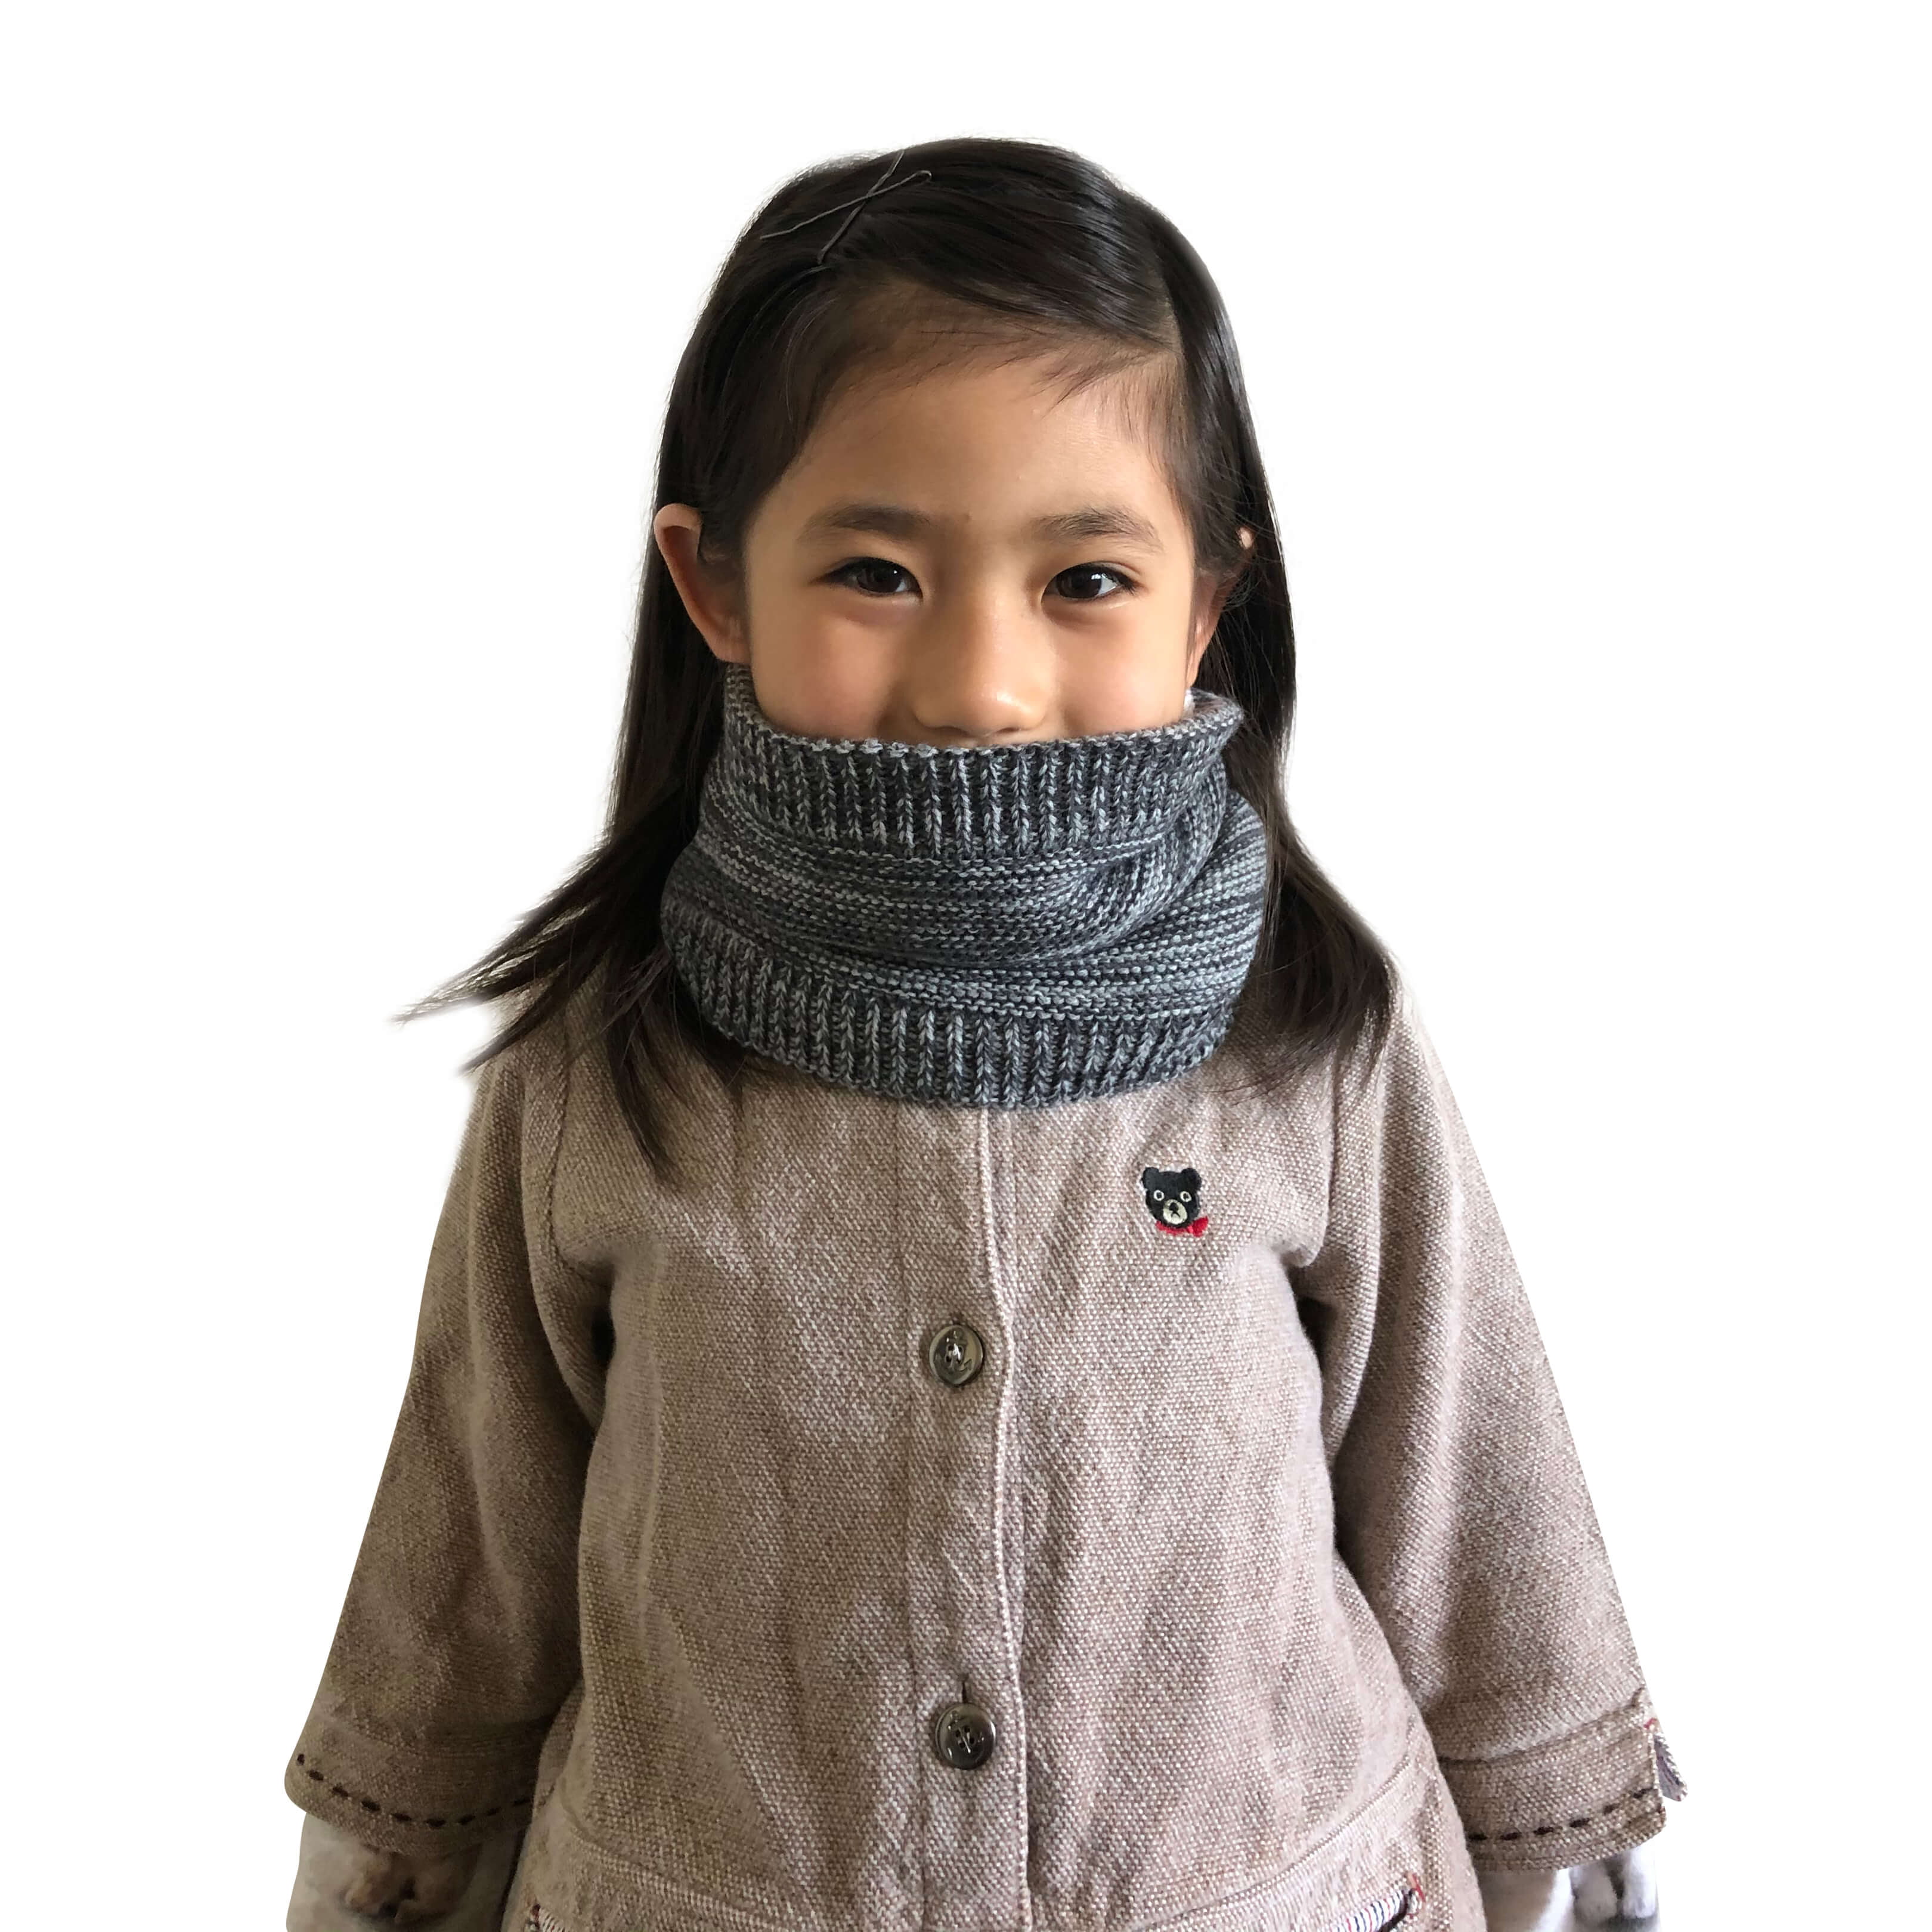 Old) Inside (Heather Gray) to Tube Scarf (Preschoolers Year Winter Neck Knit Furry Warmer for Kids 12